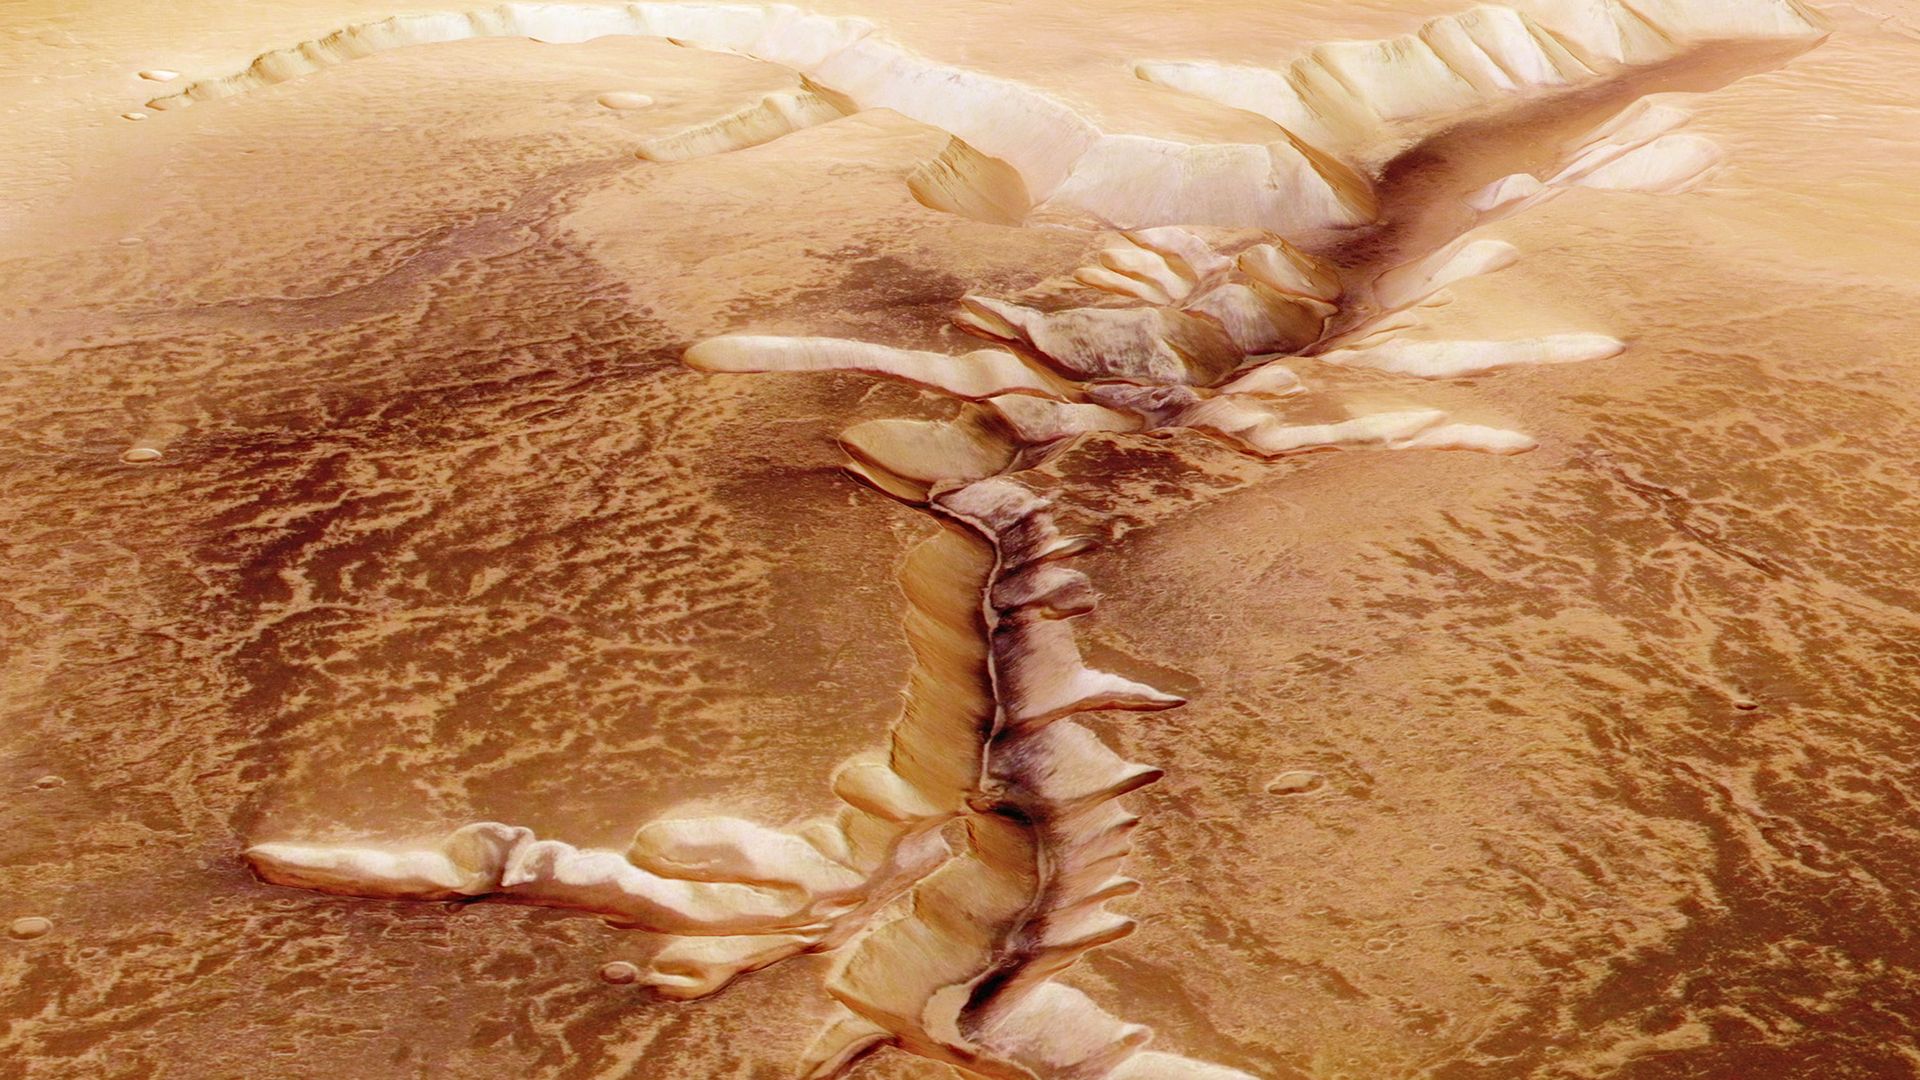 The Echus Chasma, one of the largest water source regions on Mars.